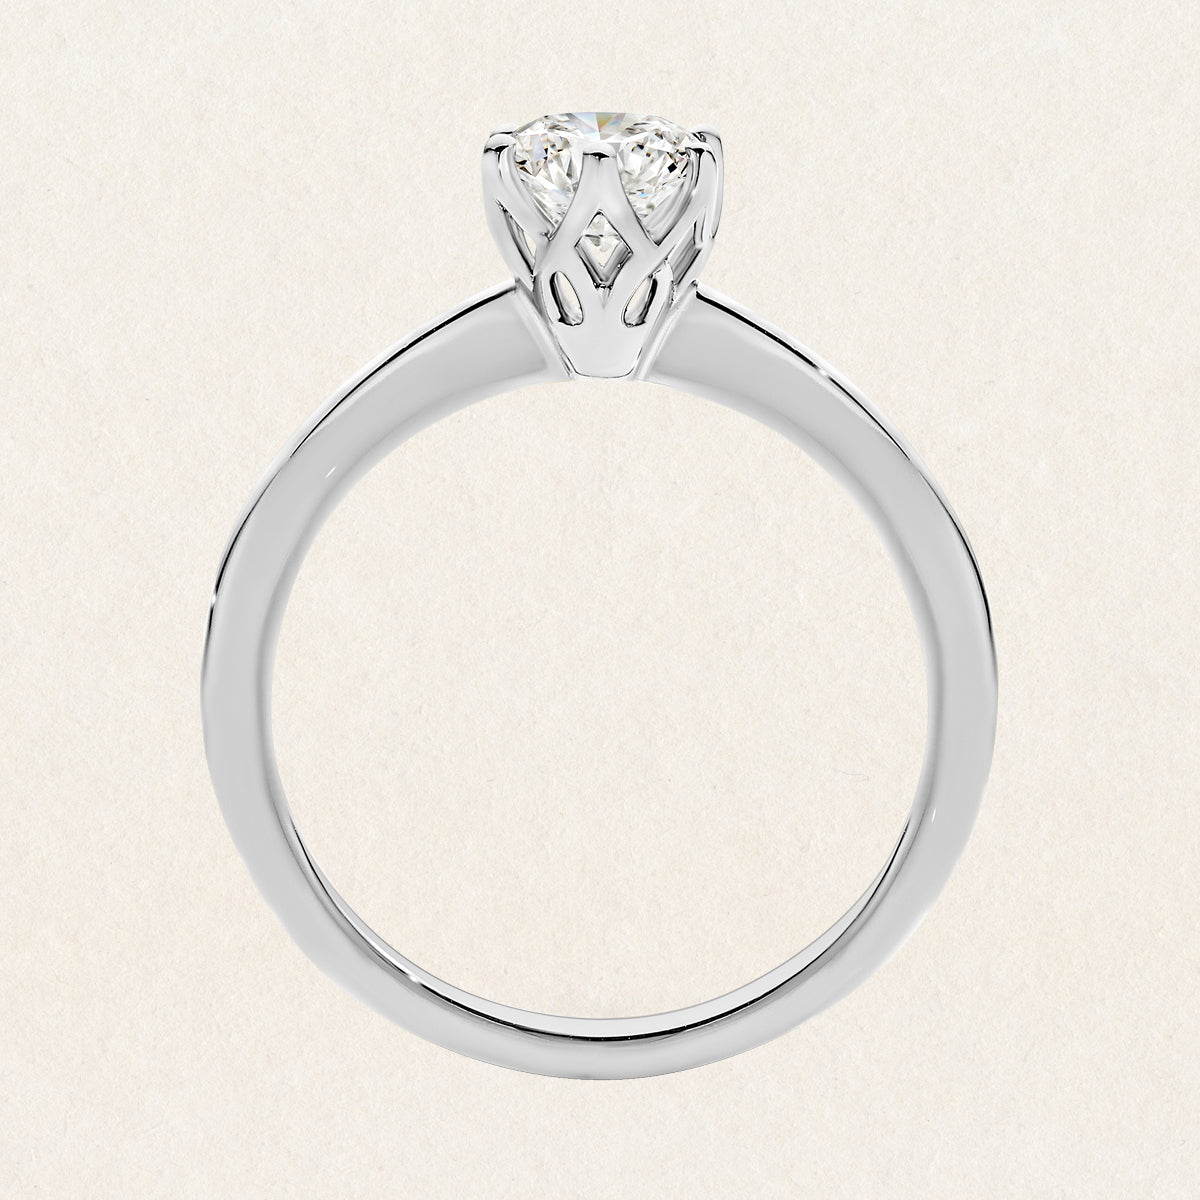 Stunning 1.00ct lab grown diamond solitaire ring made with 18k white gold